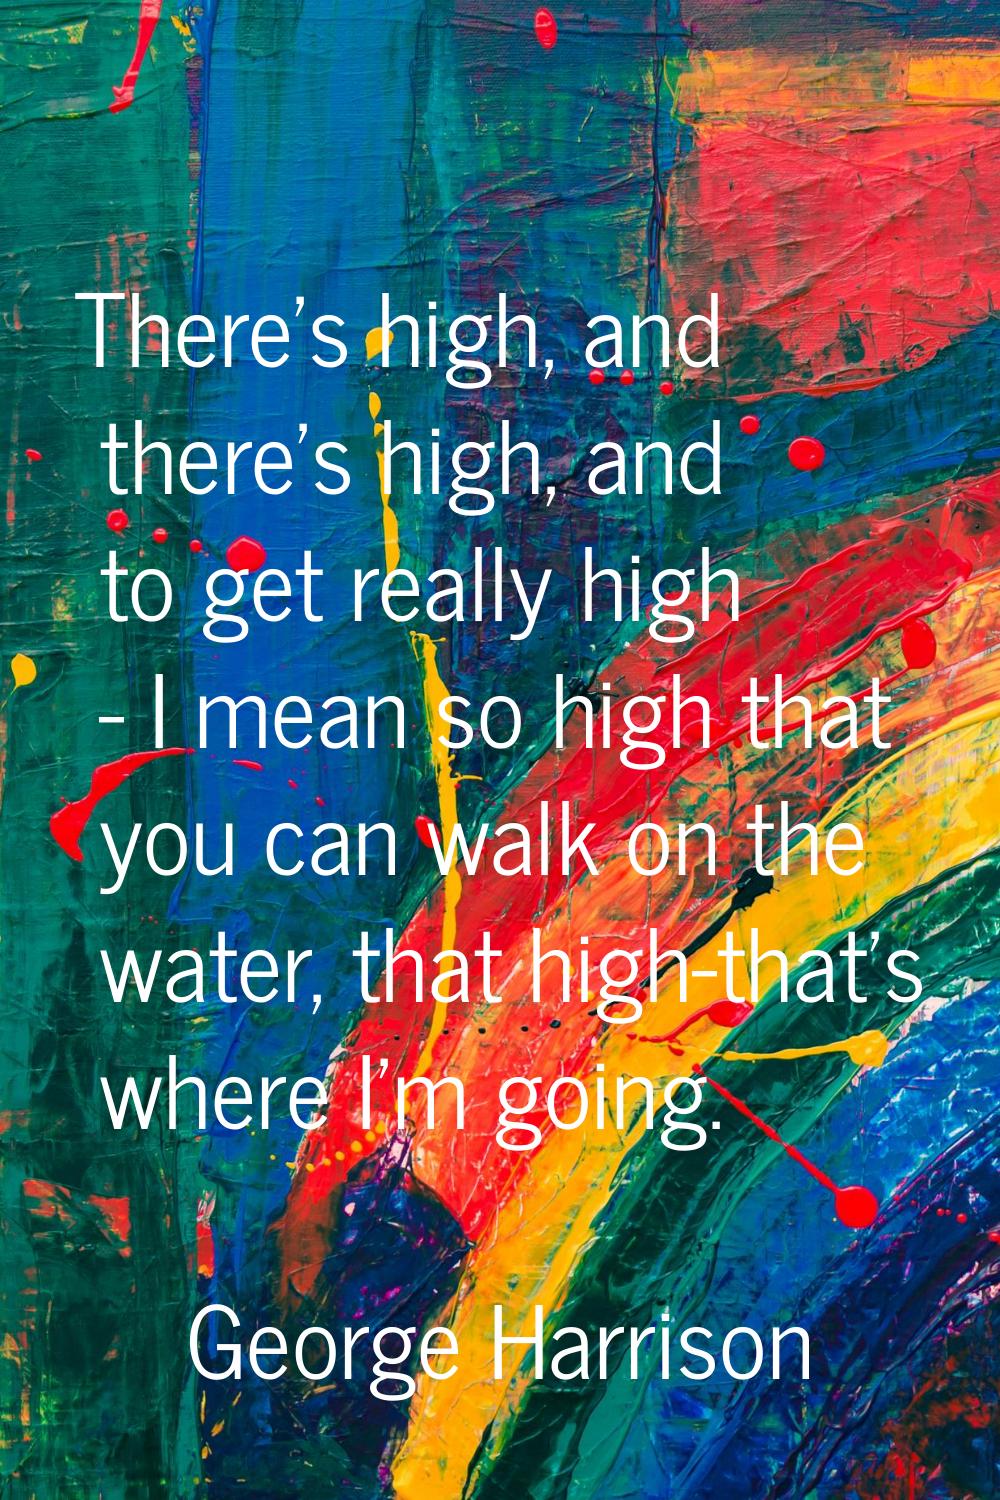 There's high, and there's high, and to get really high - I mean so high that you can walk on the wa